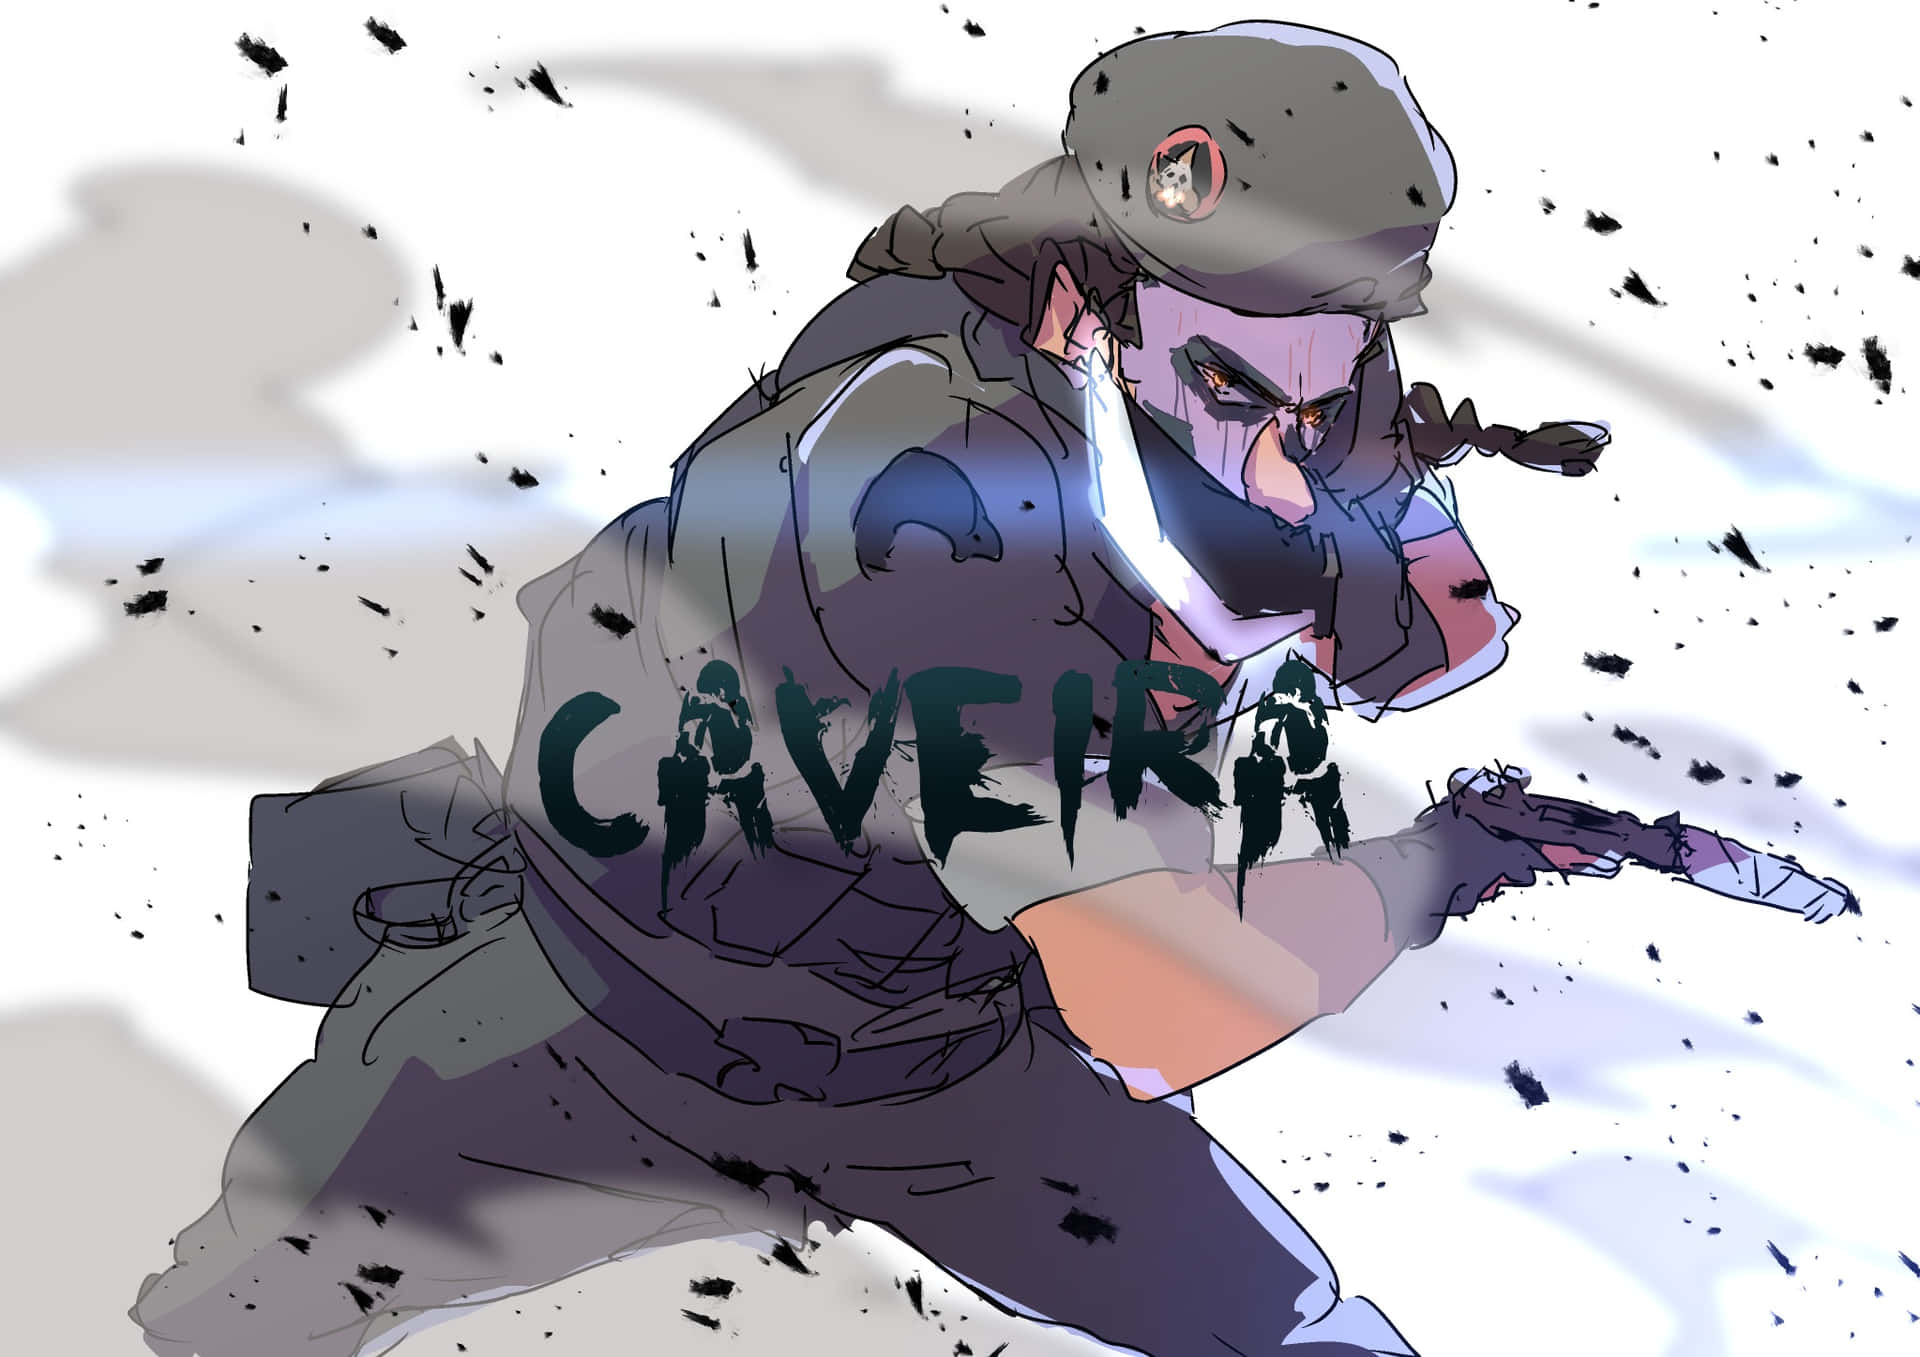 Caveira in action within a thrilling Rainbow Siege Six scenario Wallpaper